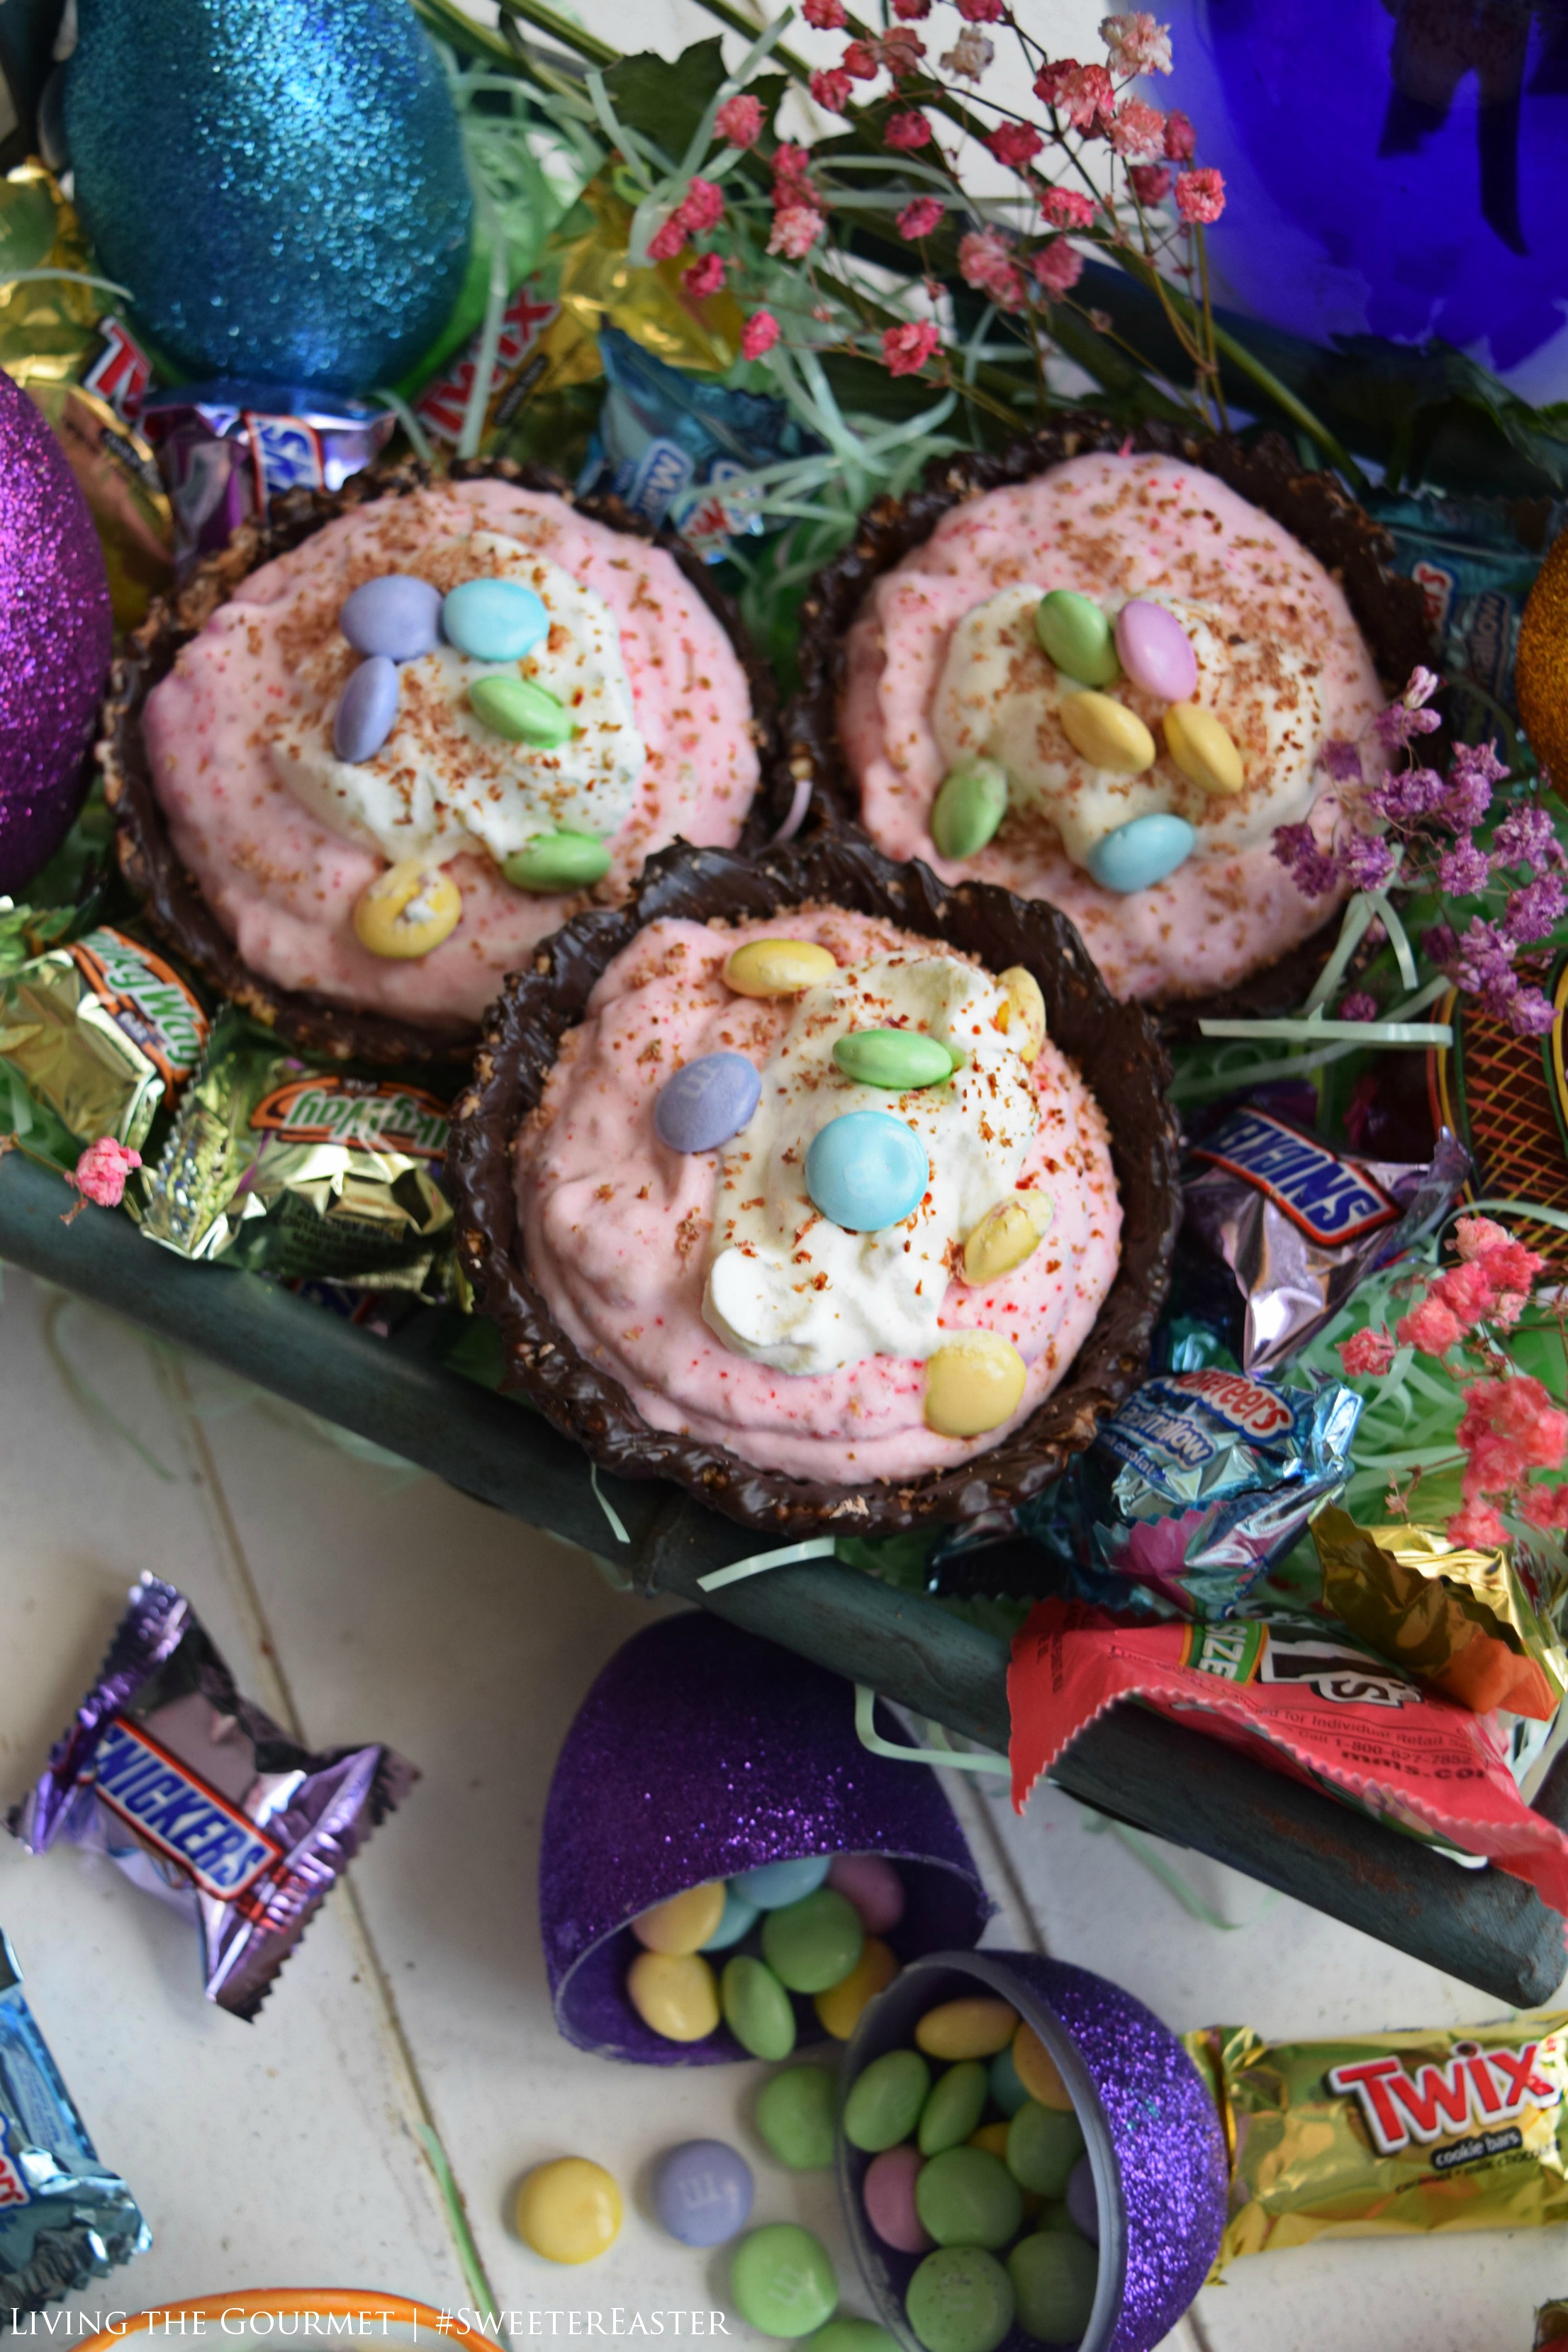 Living the Gourmet: Chocolate Easter Eggs with Strawberry Mousse | #SweeterEaster #Ad